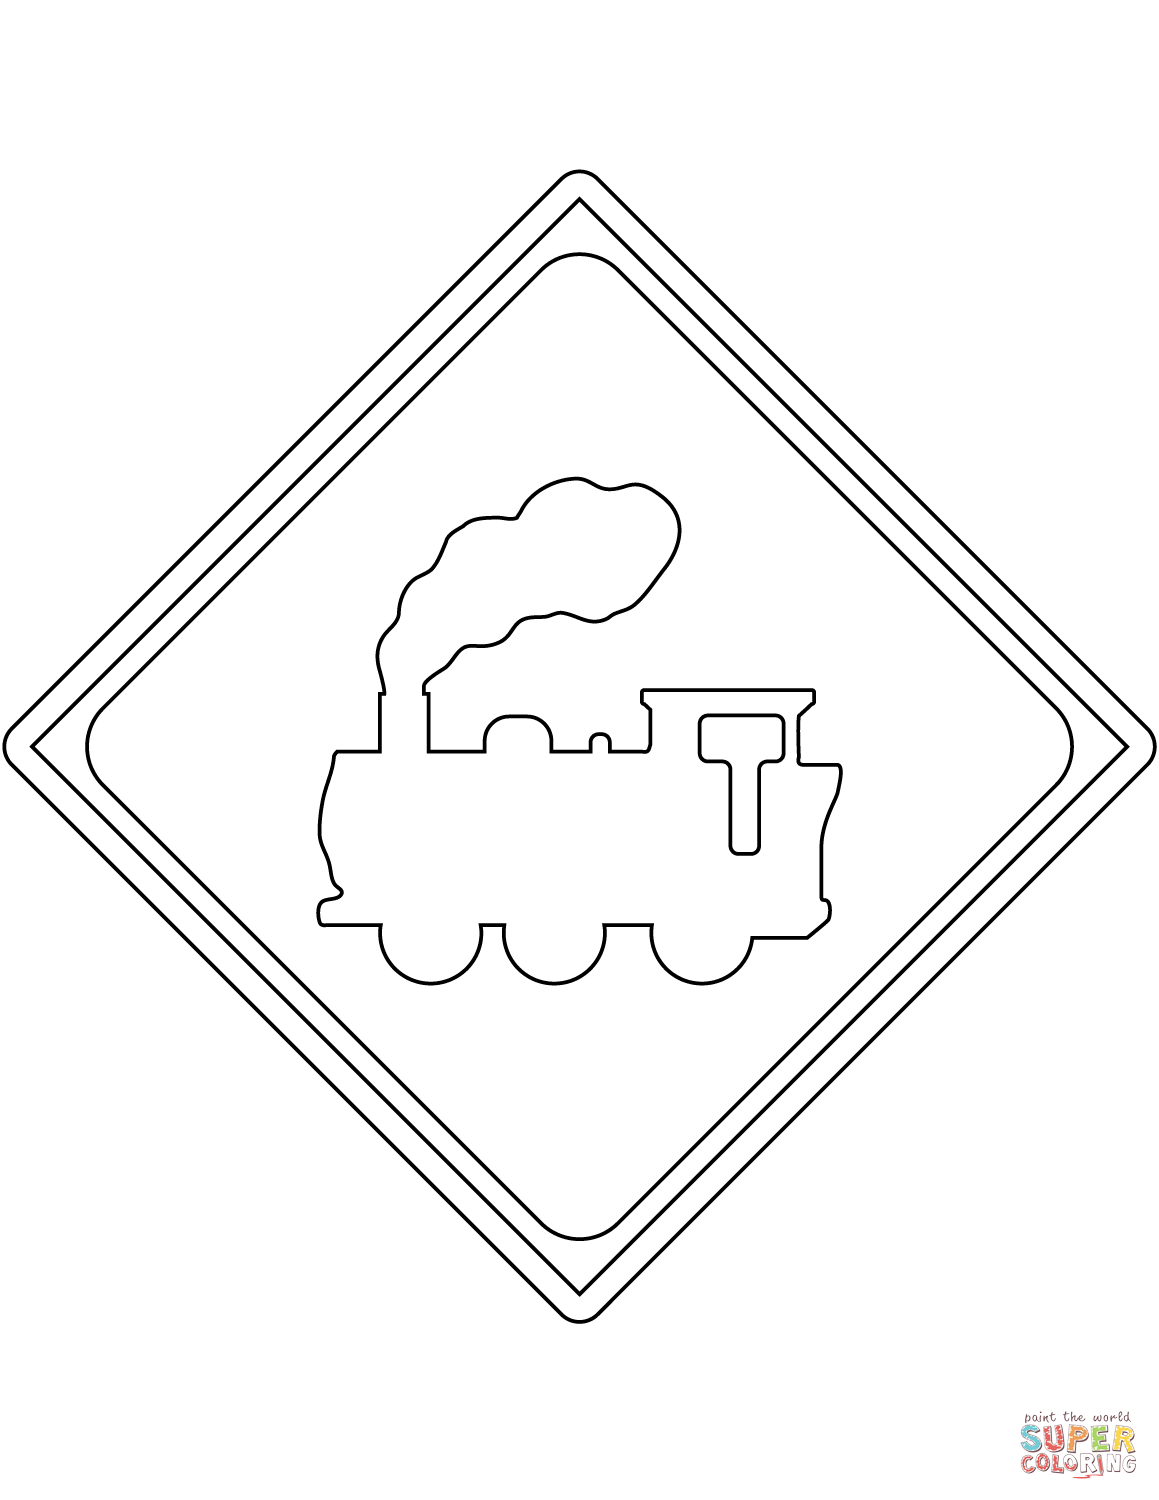 Railroad crossing ahead sign in japan coloring page free printable coloring pages